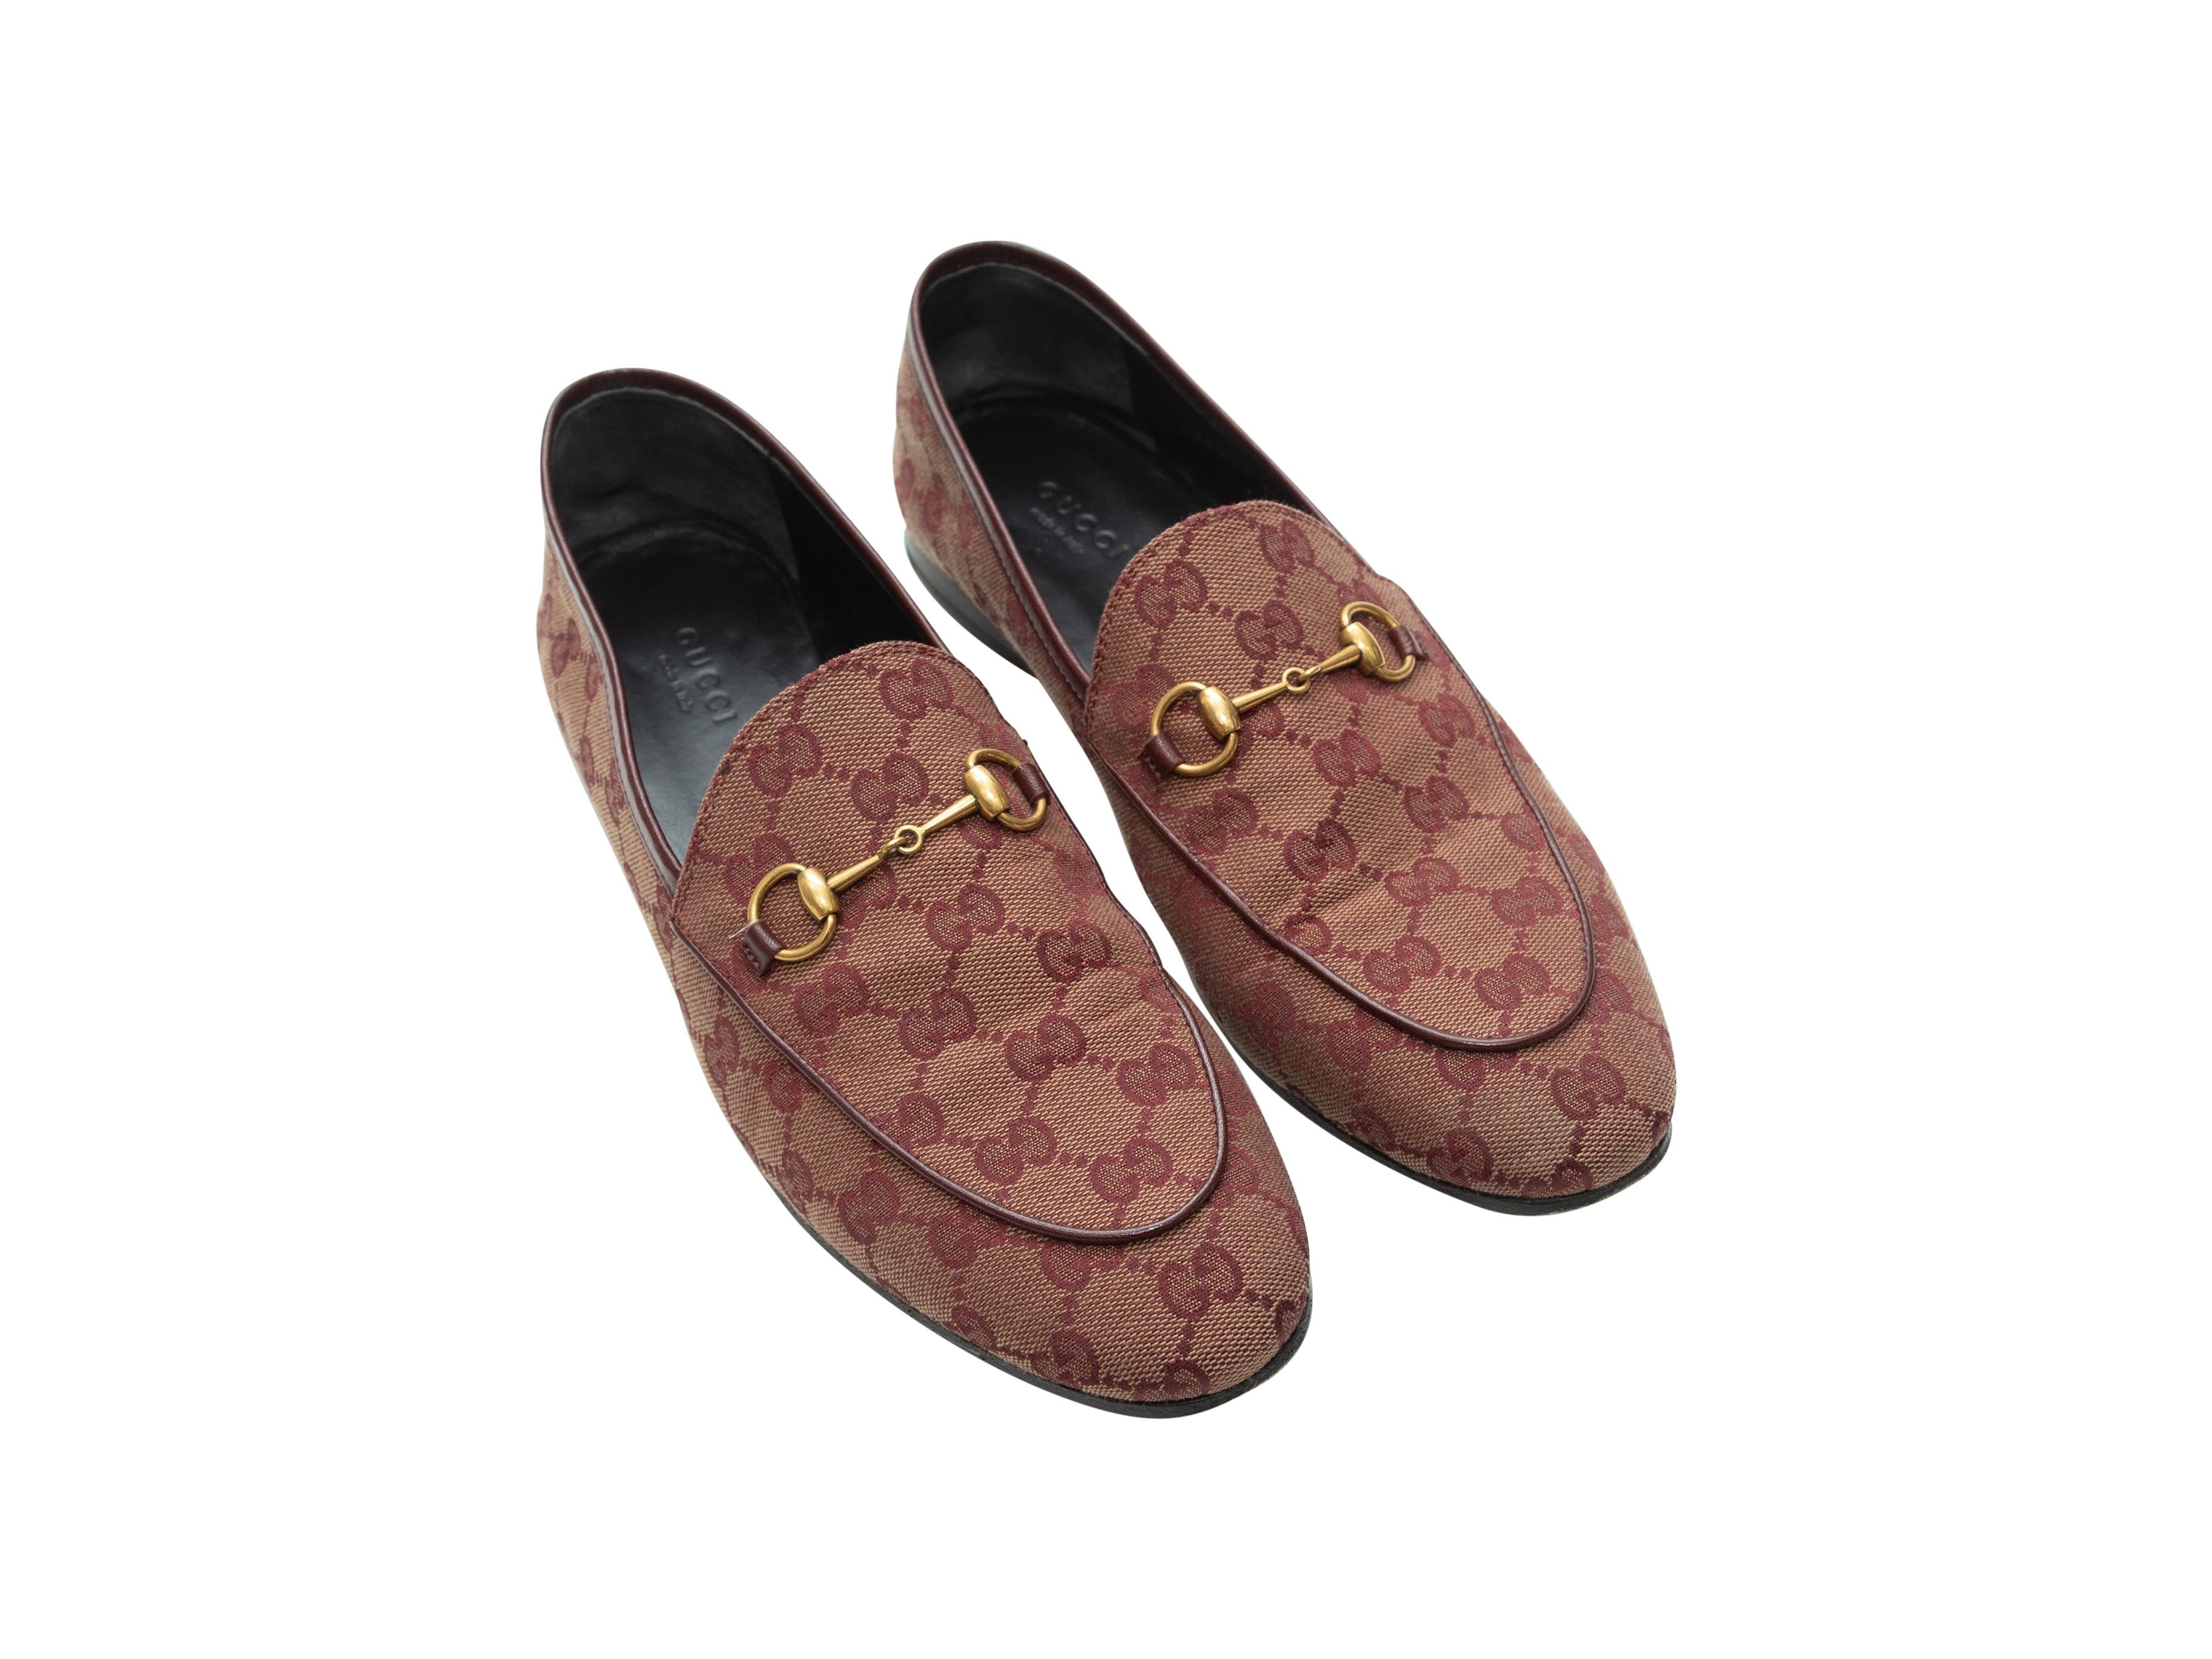 Product details: Burgundy GG canvas round-toe loafers by Gucci. Slip-on style. Tonal leather trim throughout. Gold-tone horsebit accents at tops. Designer size 40.5. 0.5